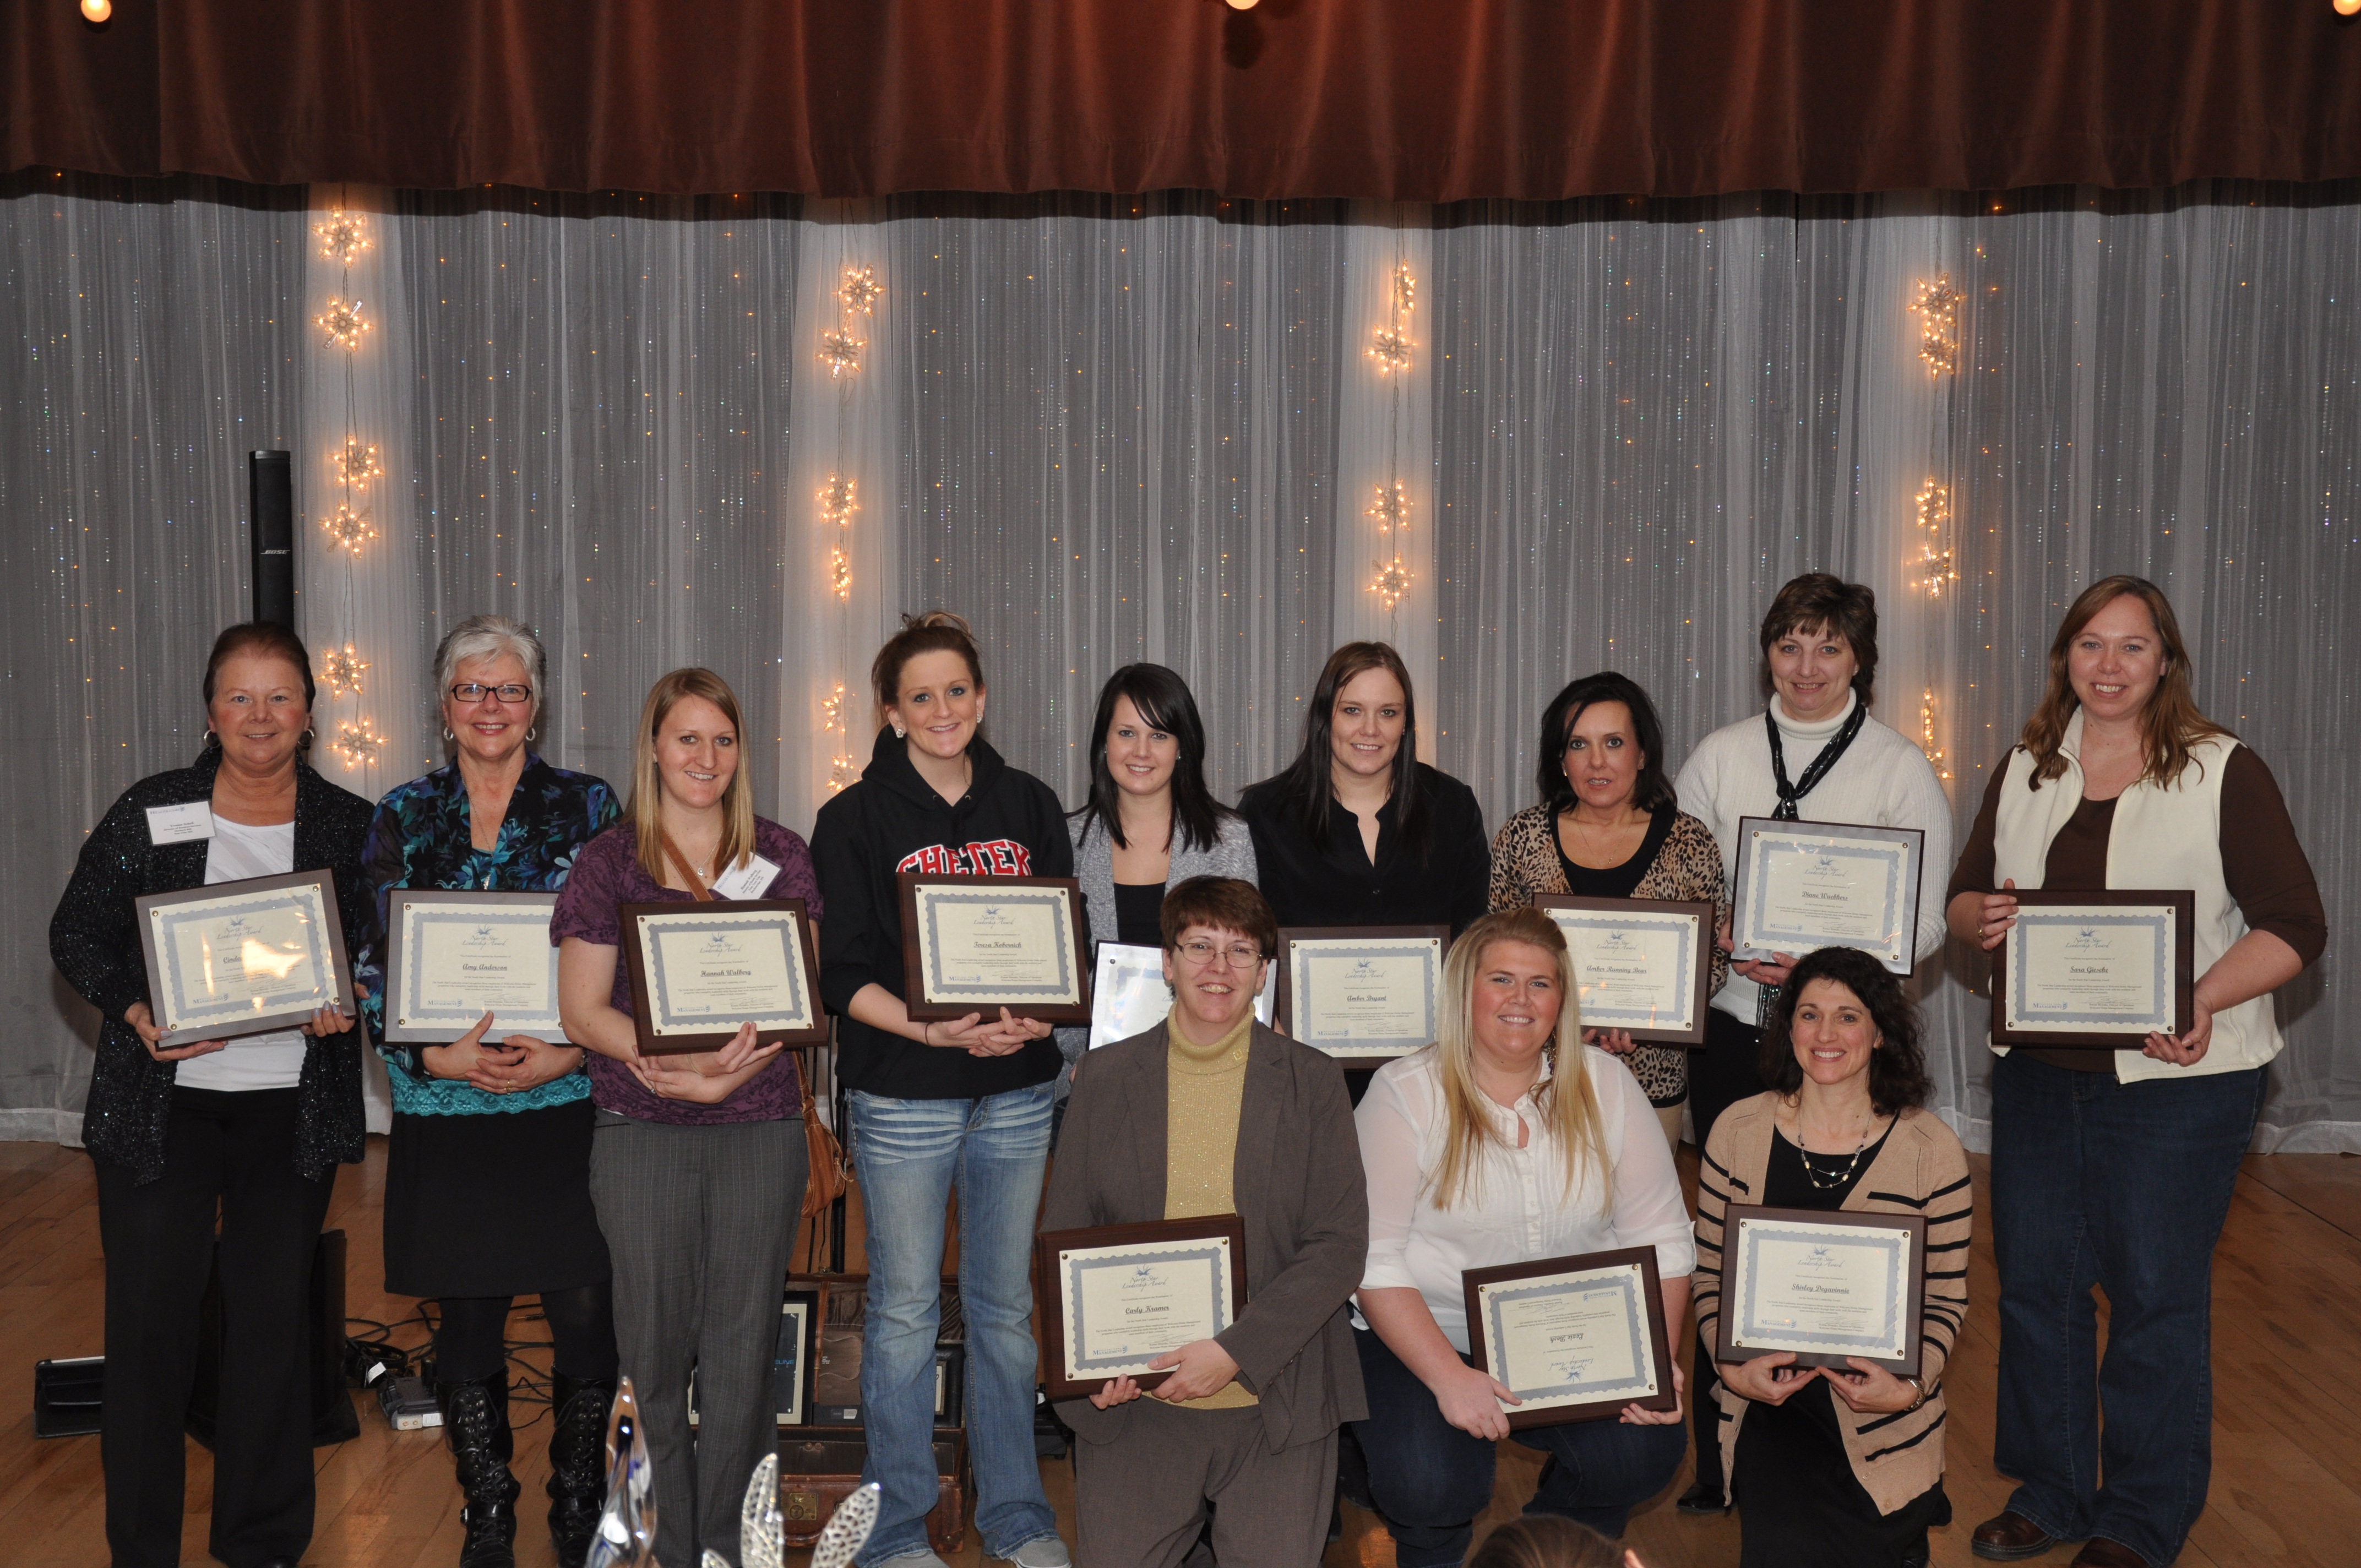 Photo of some of the nominees for the North Star Leadership Award.  If nominees were unable to attend, their Executive Director and RN are pictured in their place.